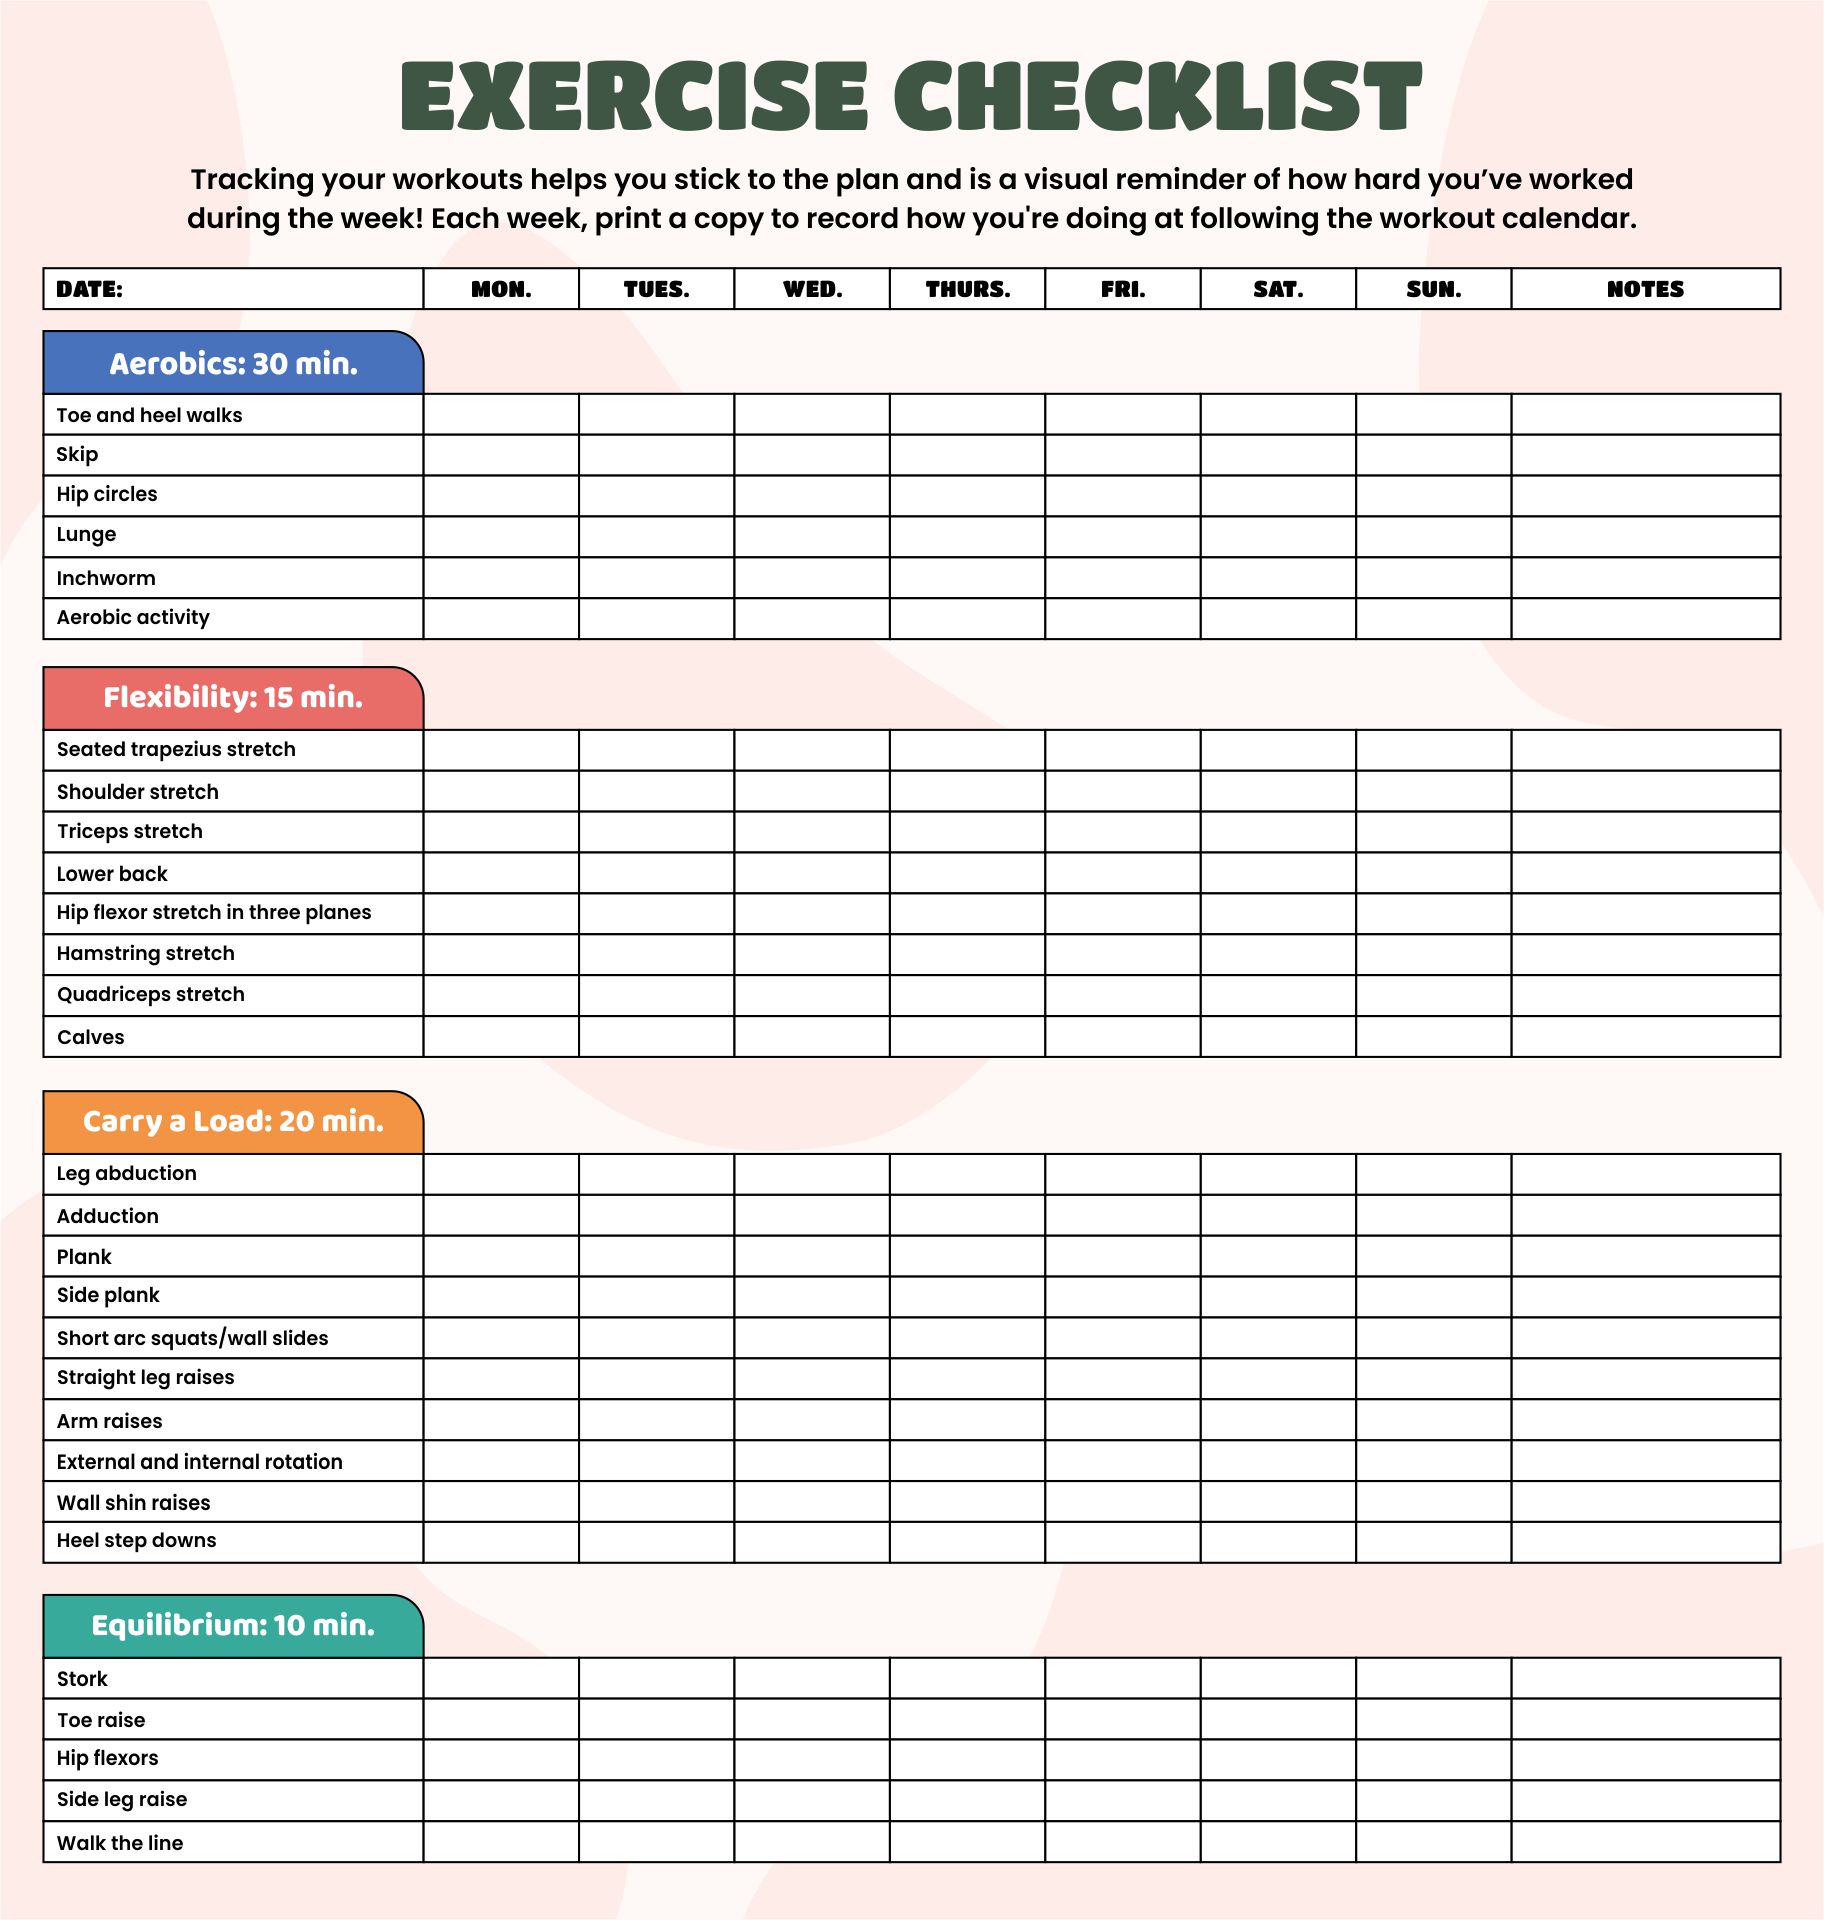 Exercise Checklist Template